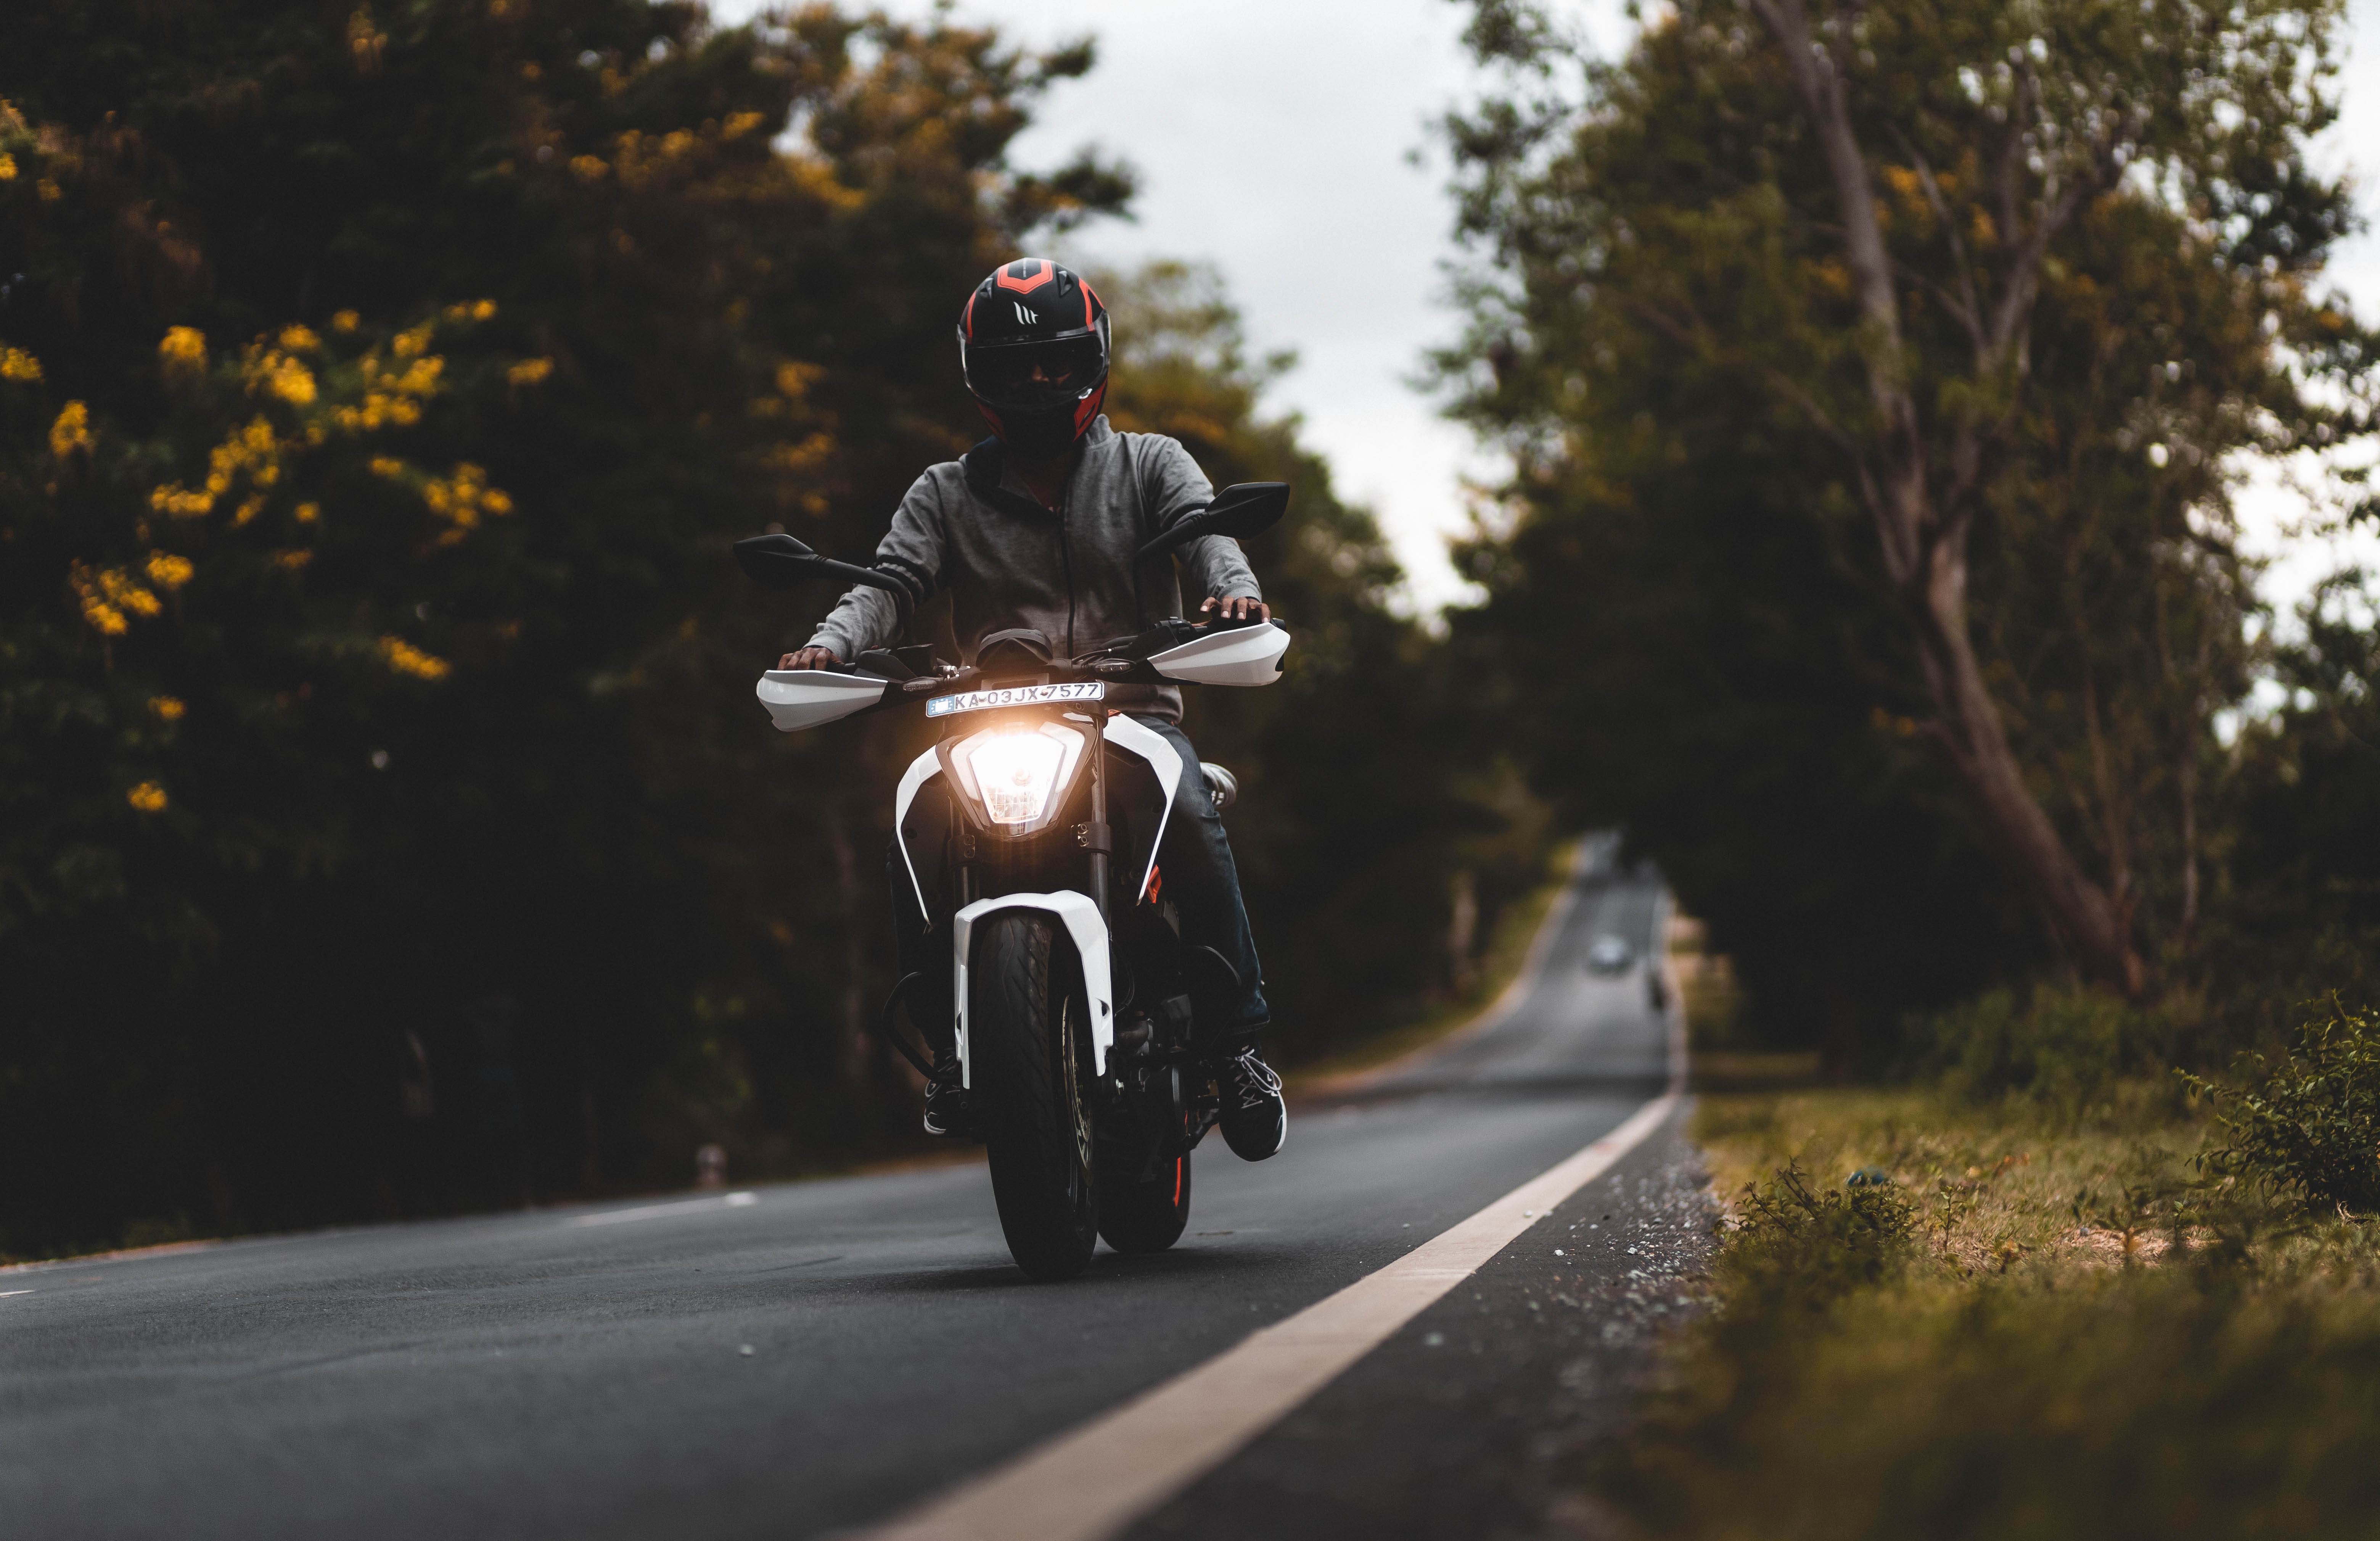 motorcyclist, motorcycles, trees, white, road, motorcycle